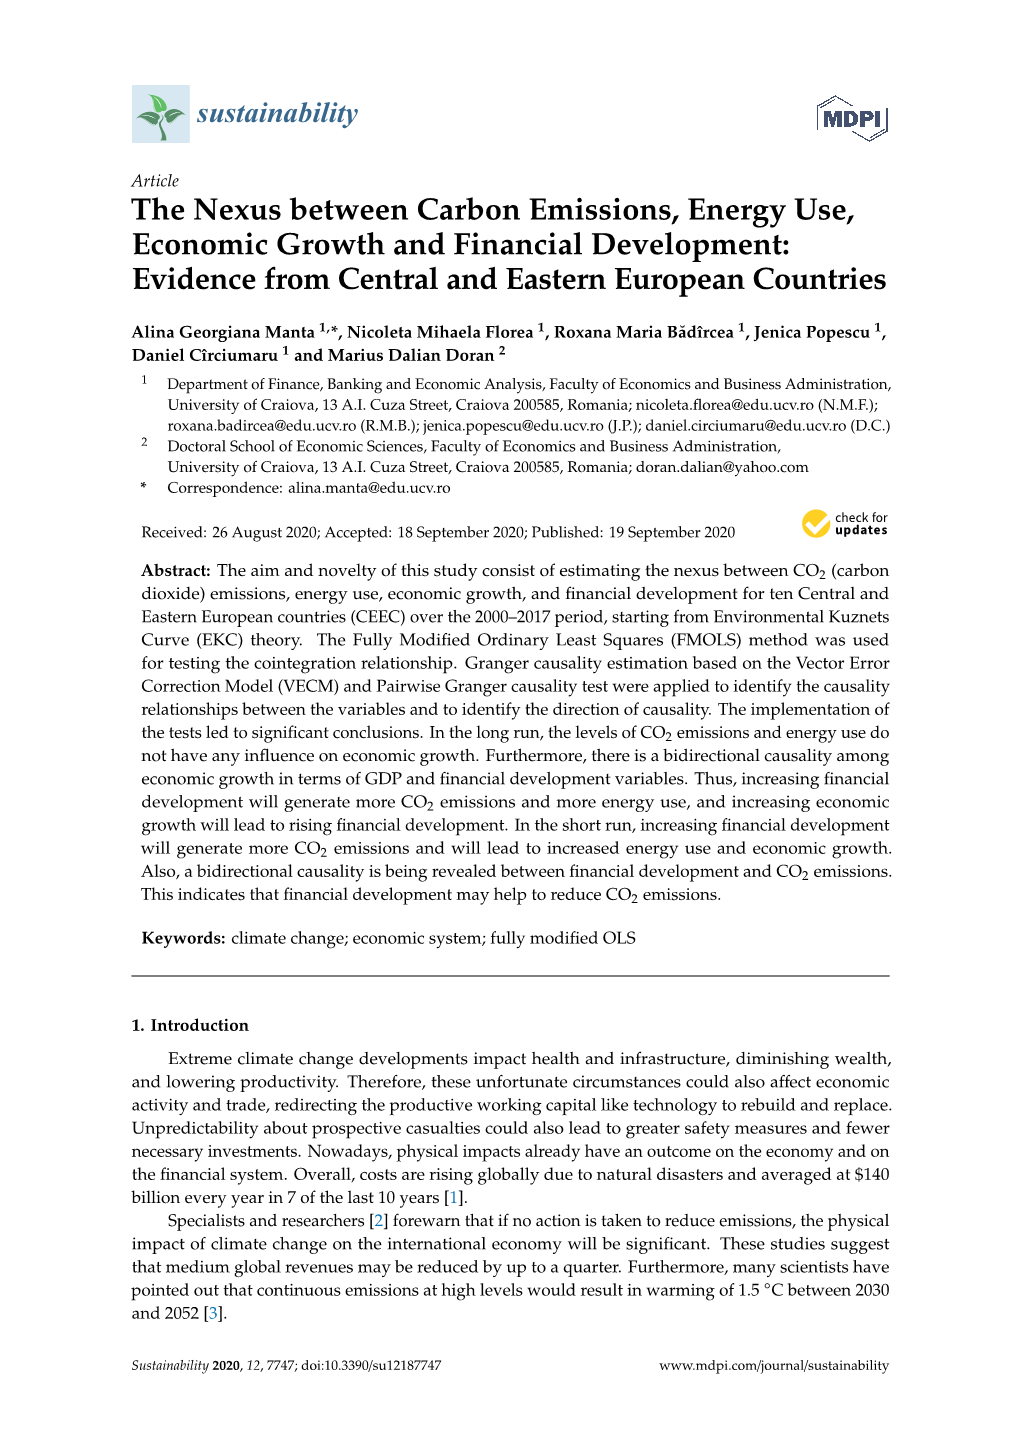 The Nexus Between Carbon Emissions, Energy Use, Economic Growth and Financial Development: Evidence from Central and Eastern European Countries